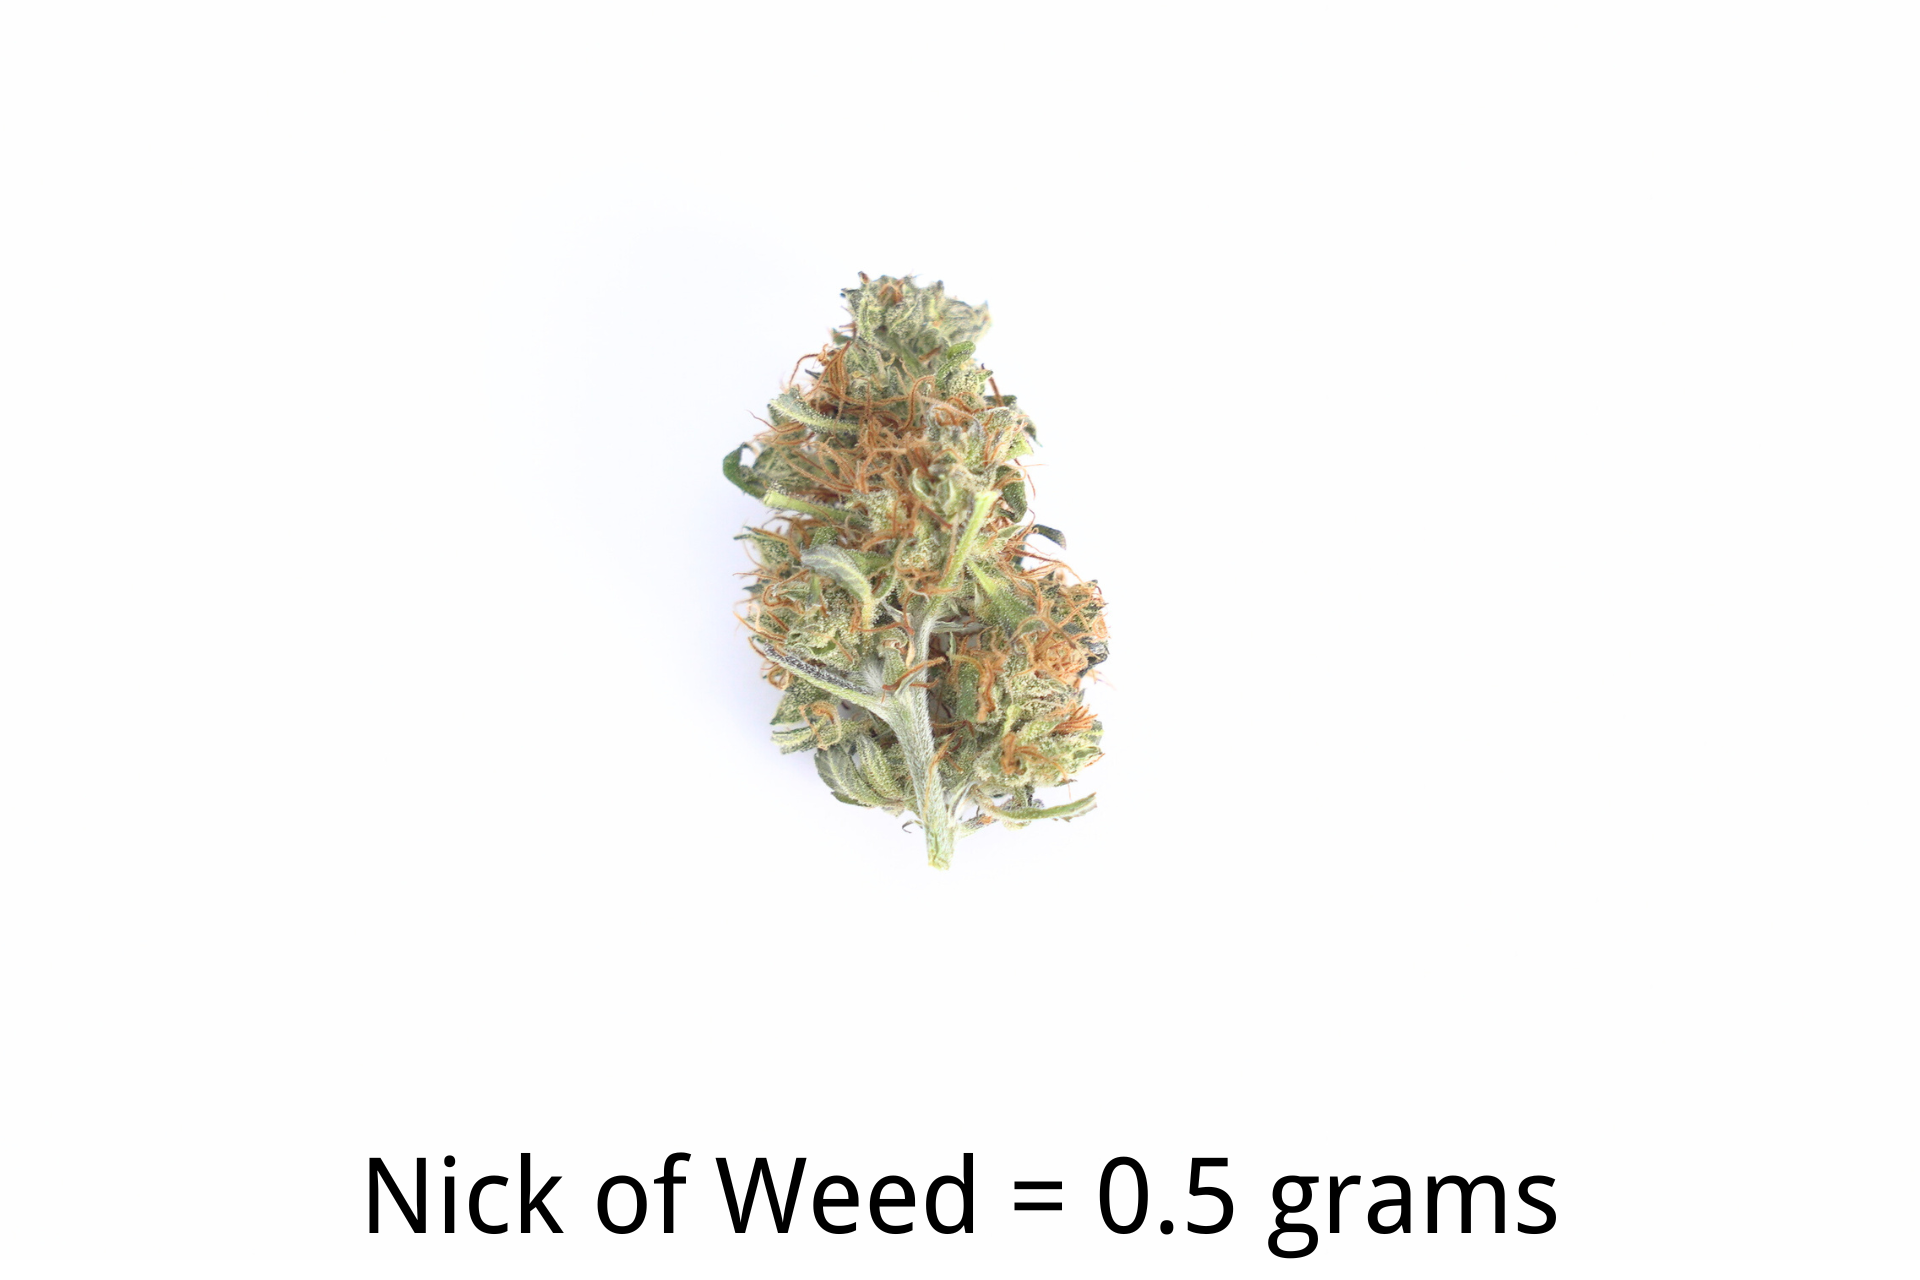 Explication of Nick of weed